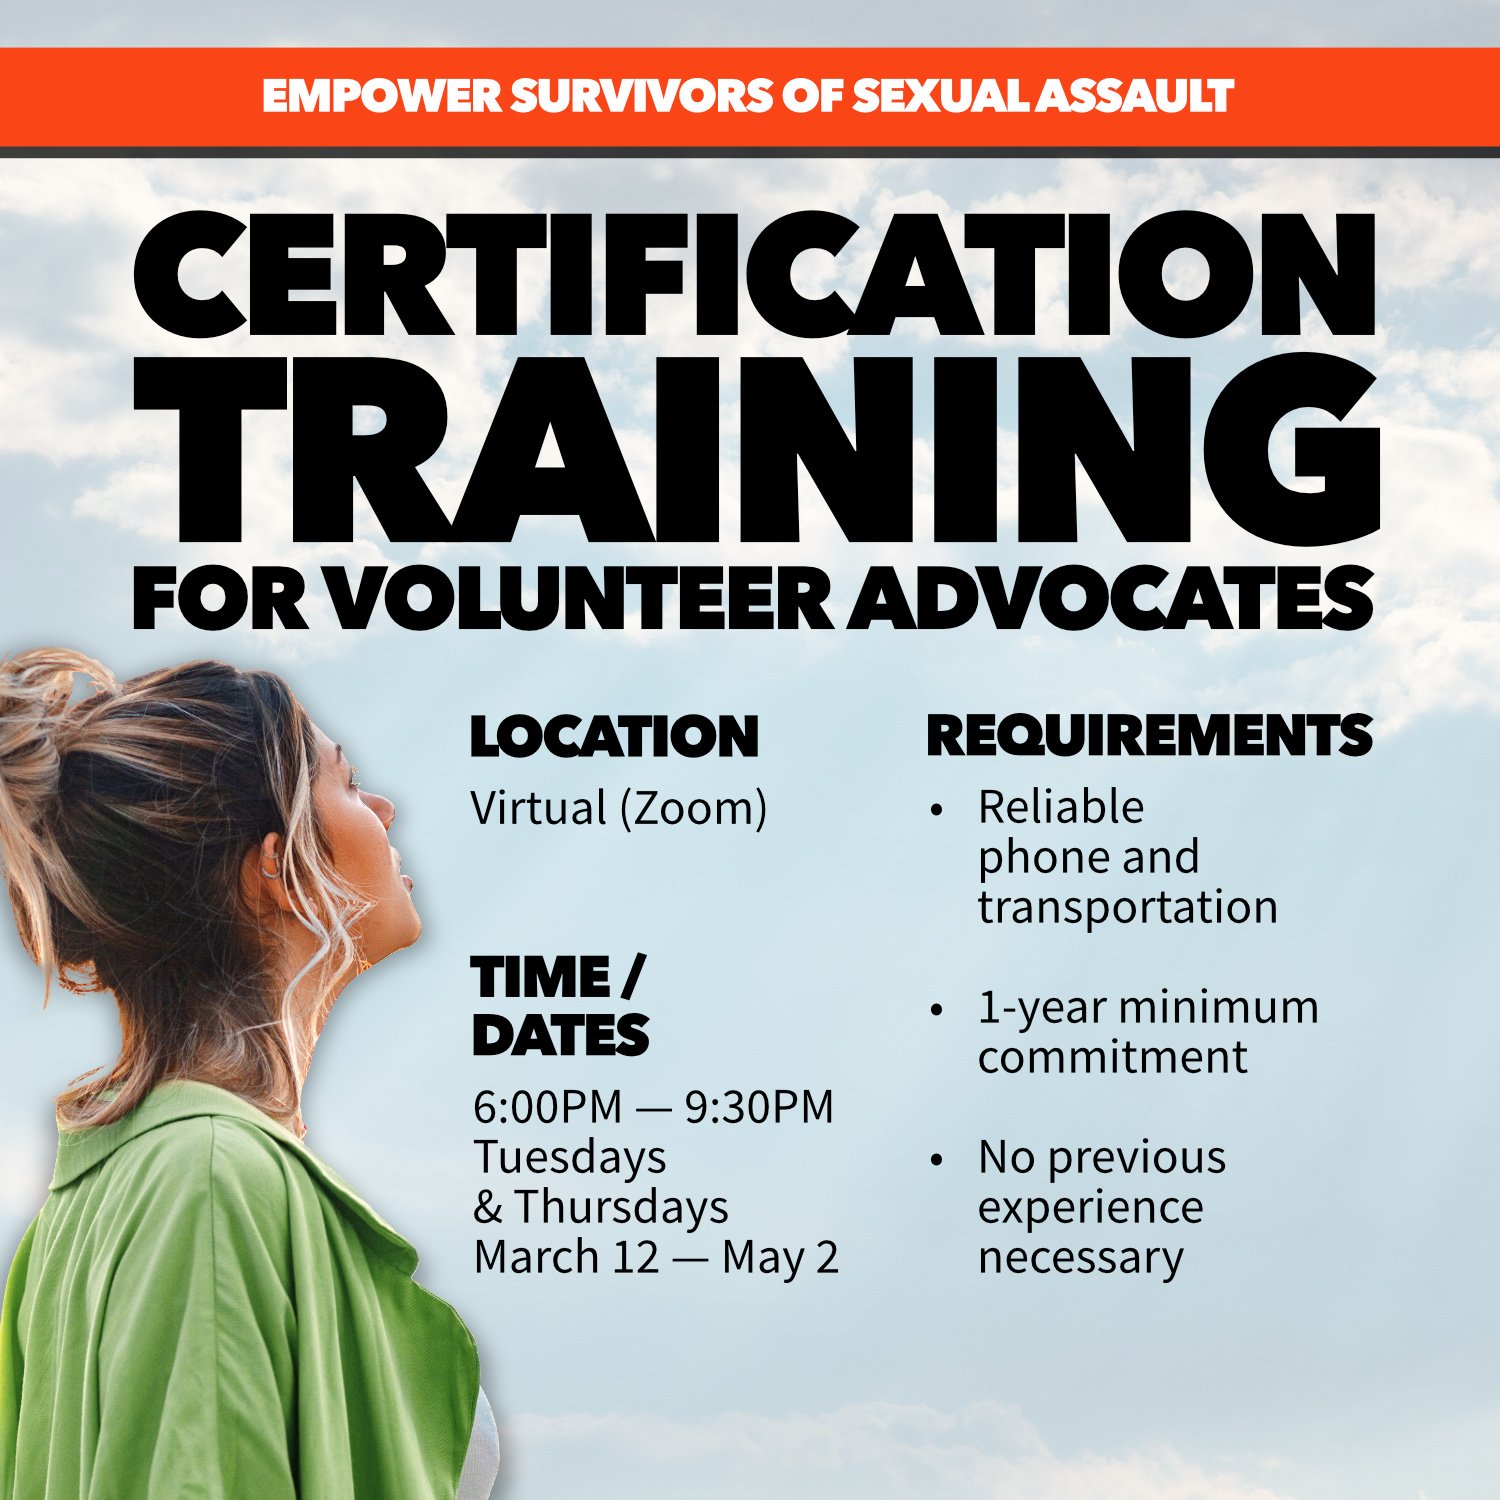 Partner up with YWCA Greater Los Angeles to advocate for survivors of sexual assault 🩵🫶🩵

Whether you're learning how to be a counselor for our 24-hour hotline, or how to give support during a forensic medical exam, you can change a survivor's lif